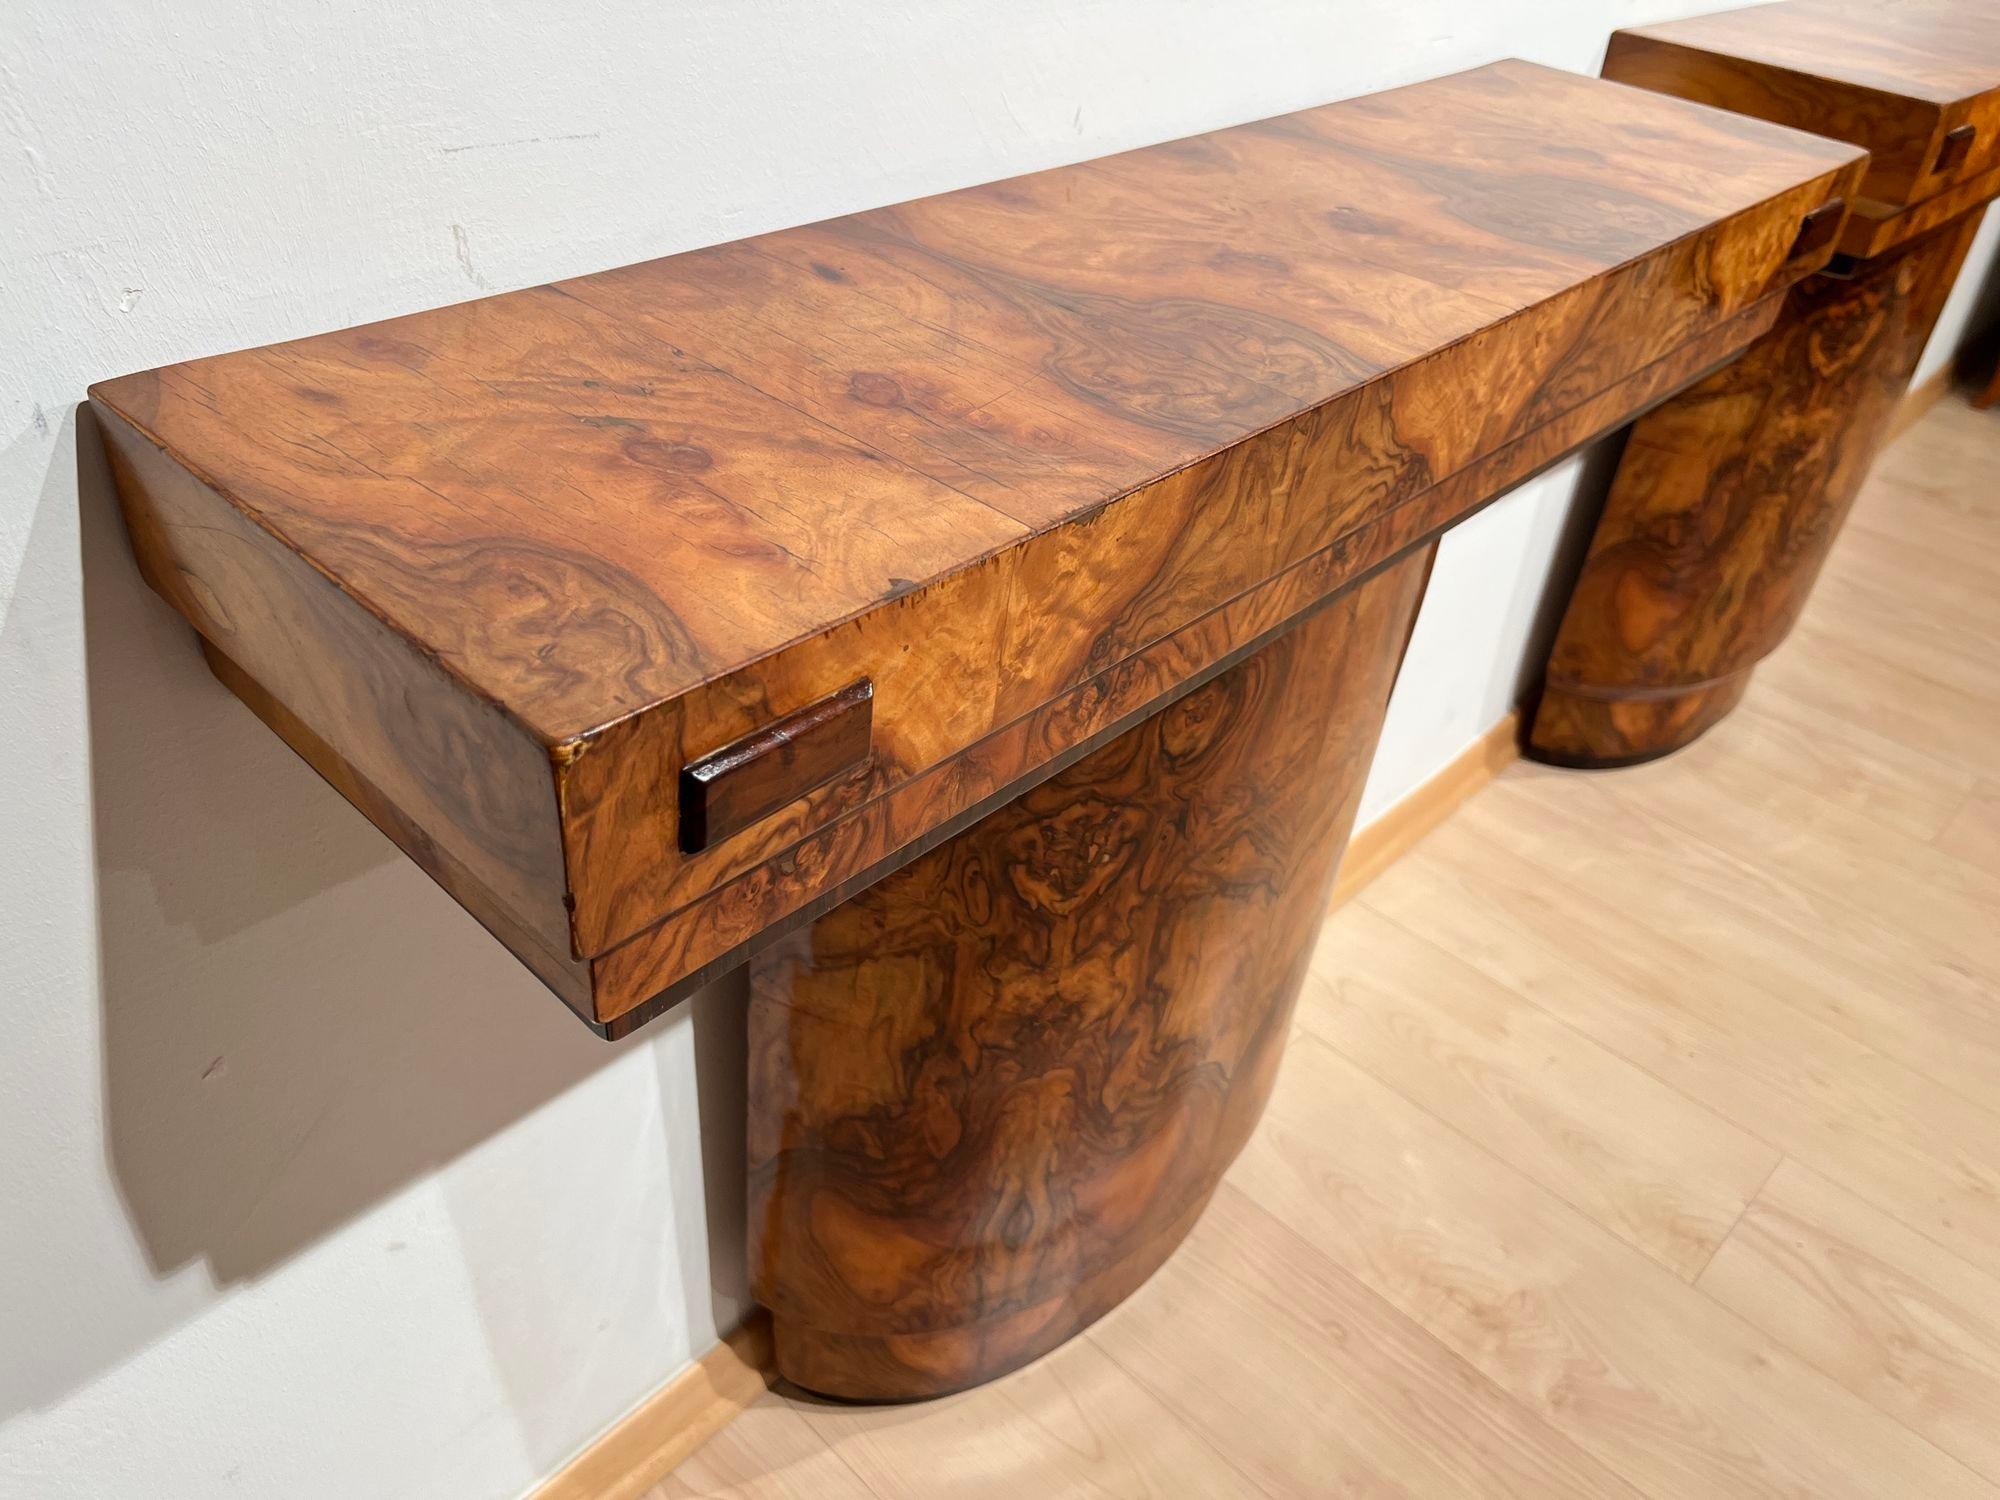 Polished Pair of Art Deco Console Tables, Walnut Veneer and Macassar, France circa 1930 For Sale